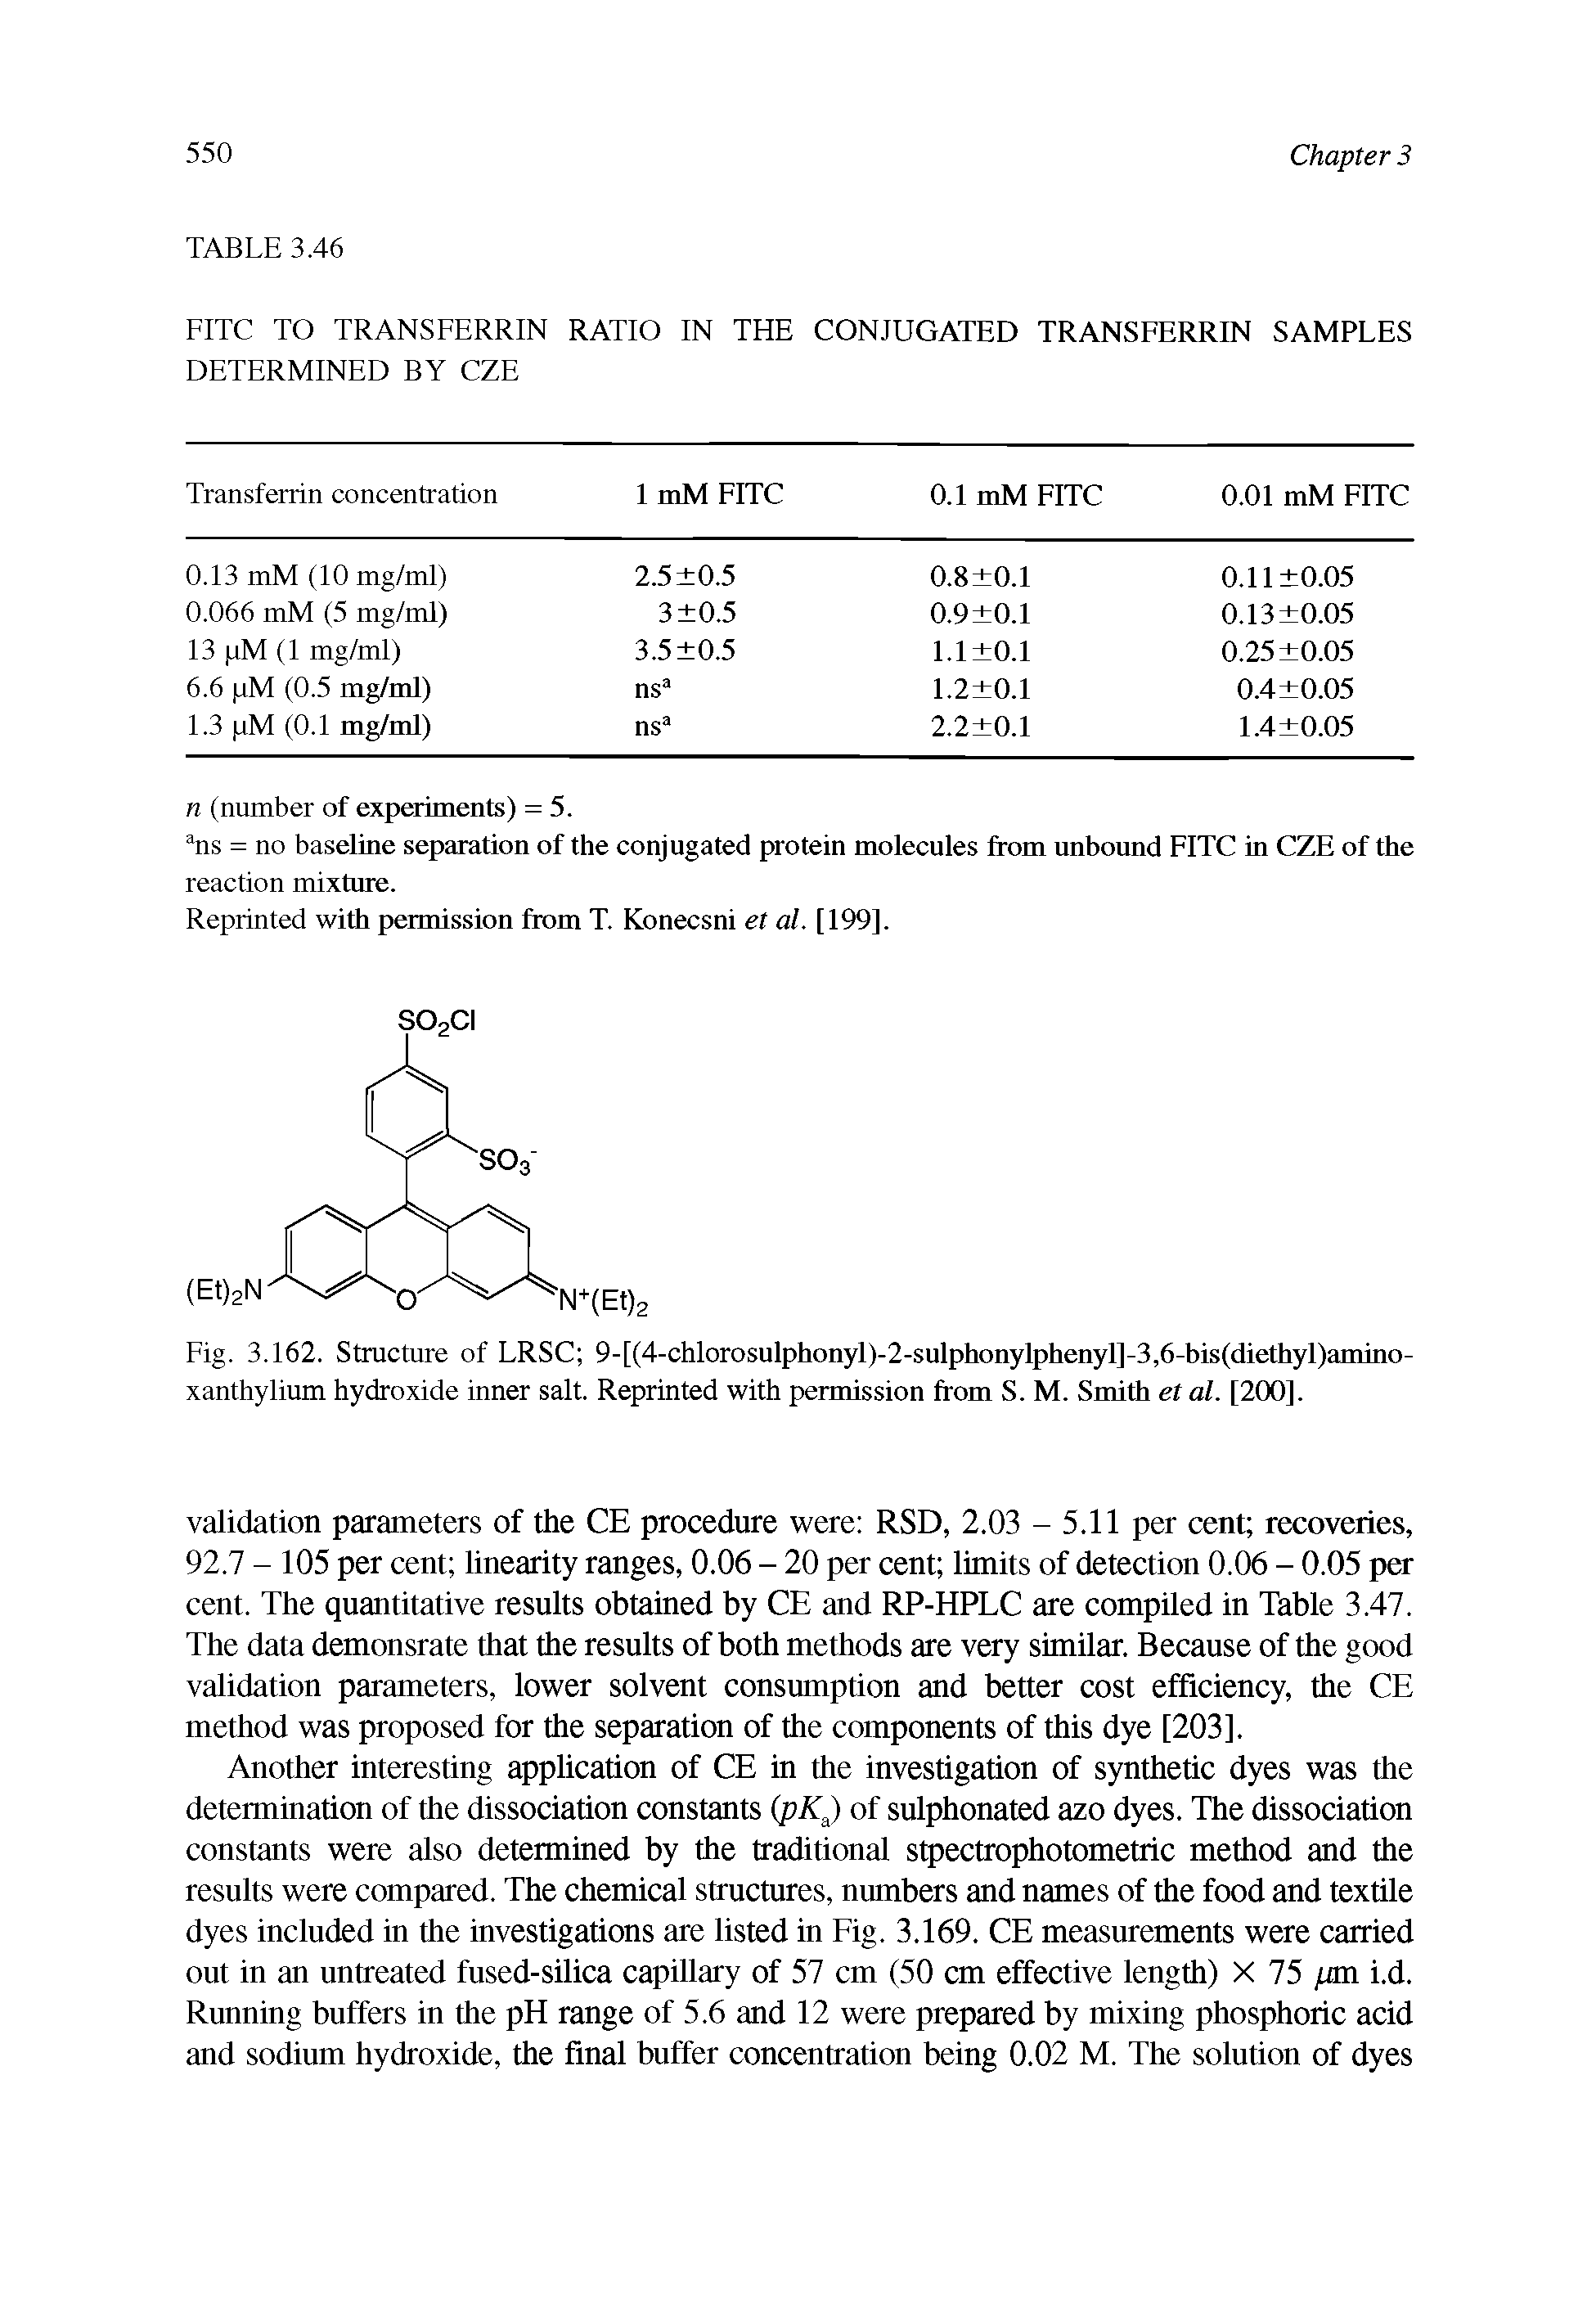 Fig. 3.162. Structure of LRSC 9-[(4-chlorosulphonyl)-2-sulphonylphenyl]-3,6-bis(diethyl)amino-xanthylium hydroxide inner salt. Reprinted with permission from S. M. Smith et al. [200].